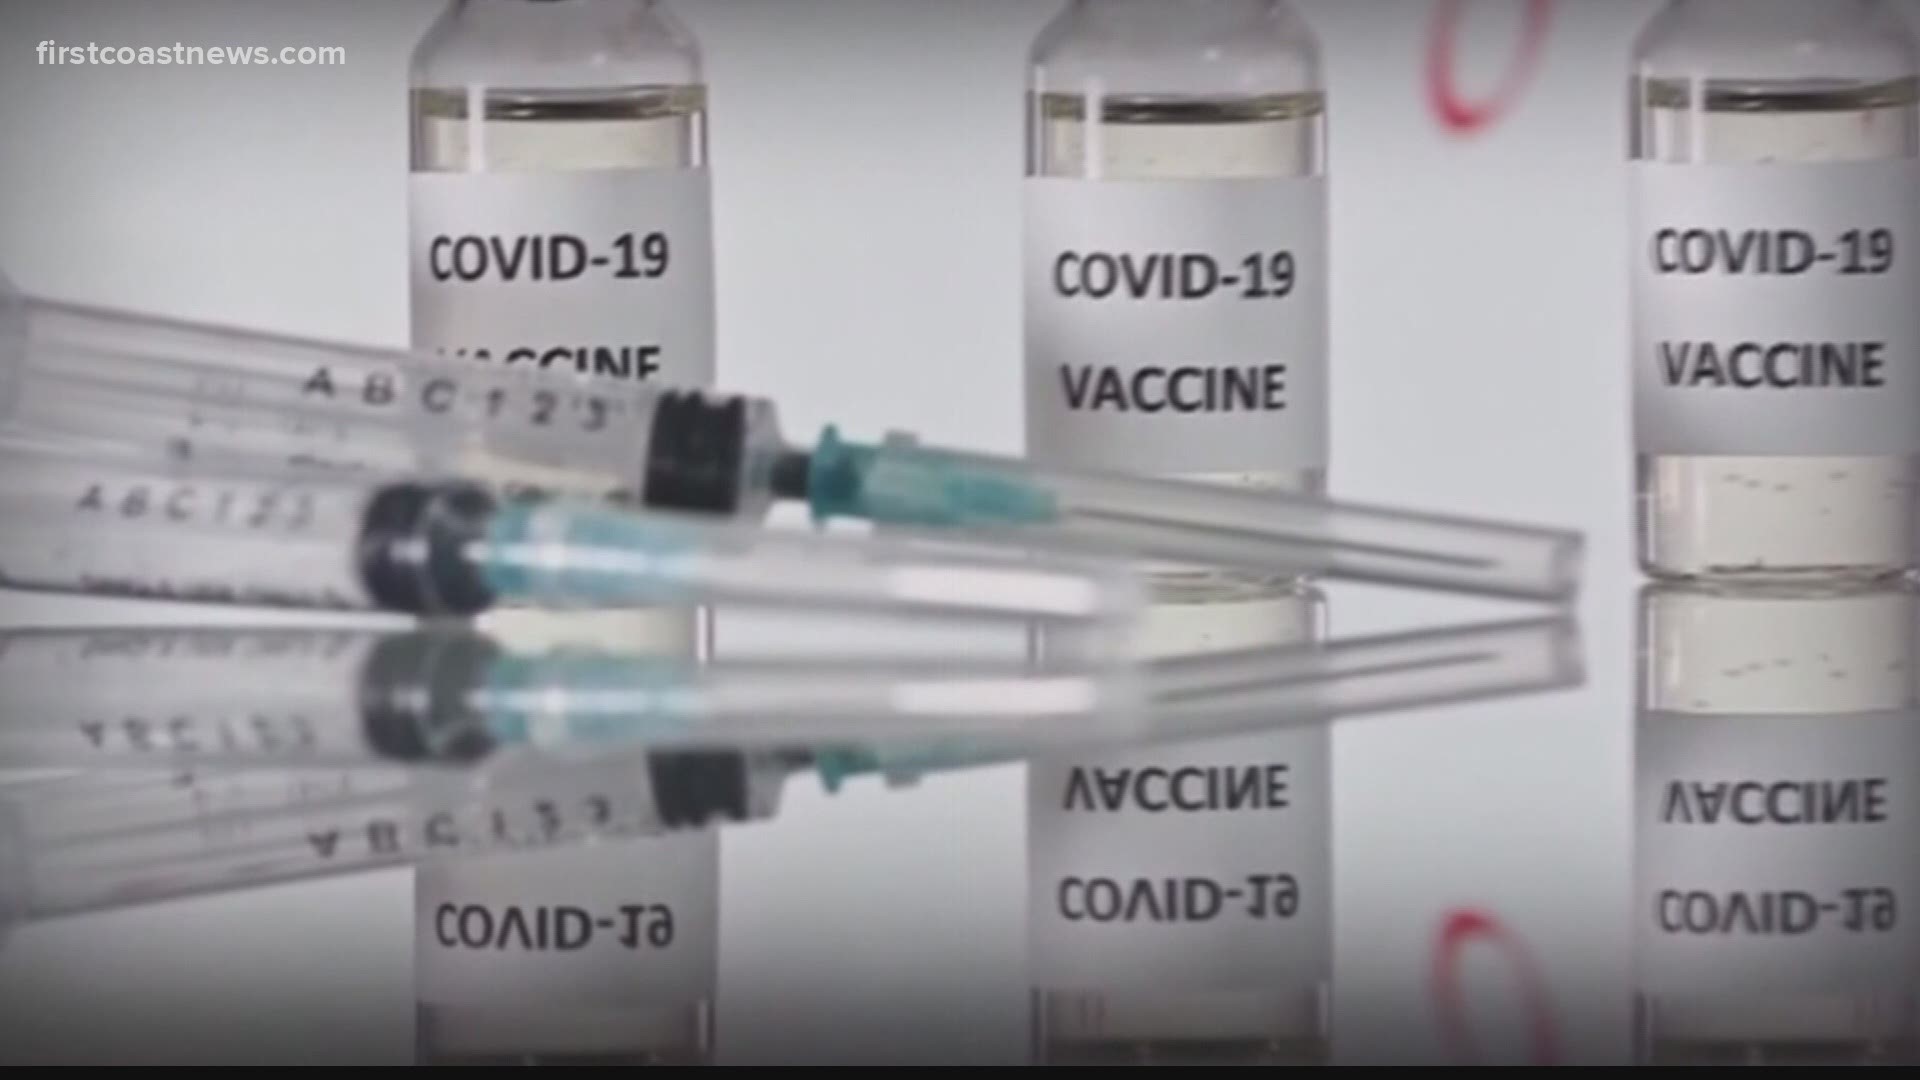 The I'm A Star Foundation is encouraging other Gen Z and millennials to get the COVID-19 vaccine through a social media campaign.